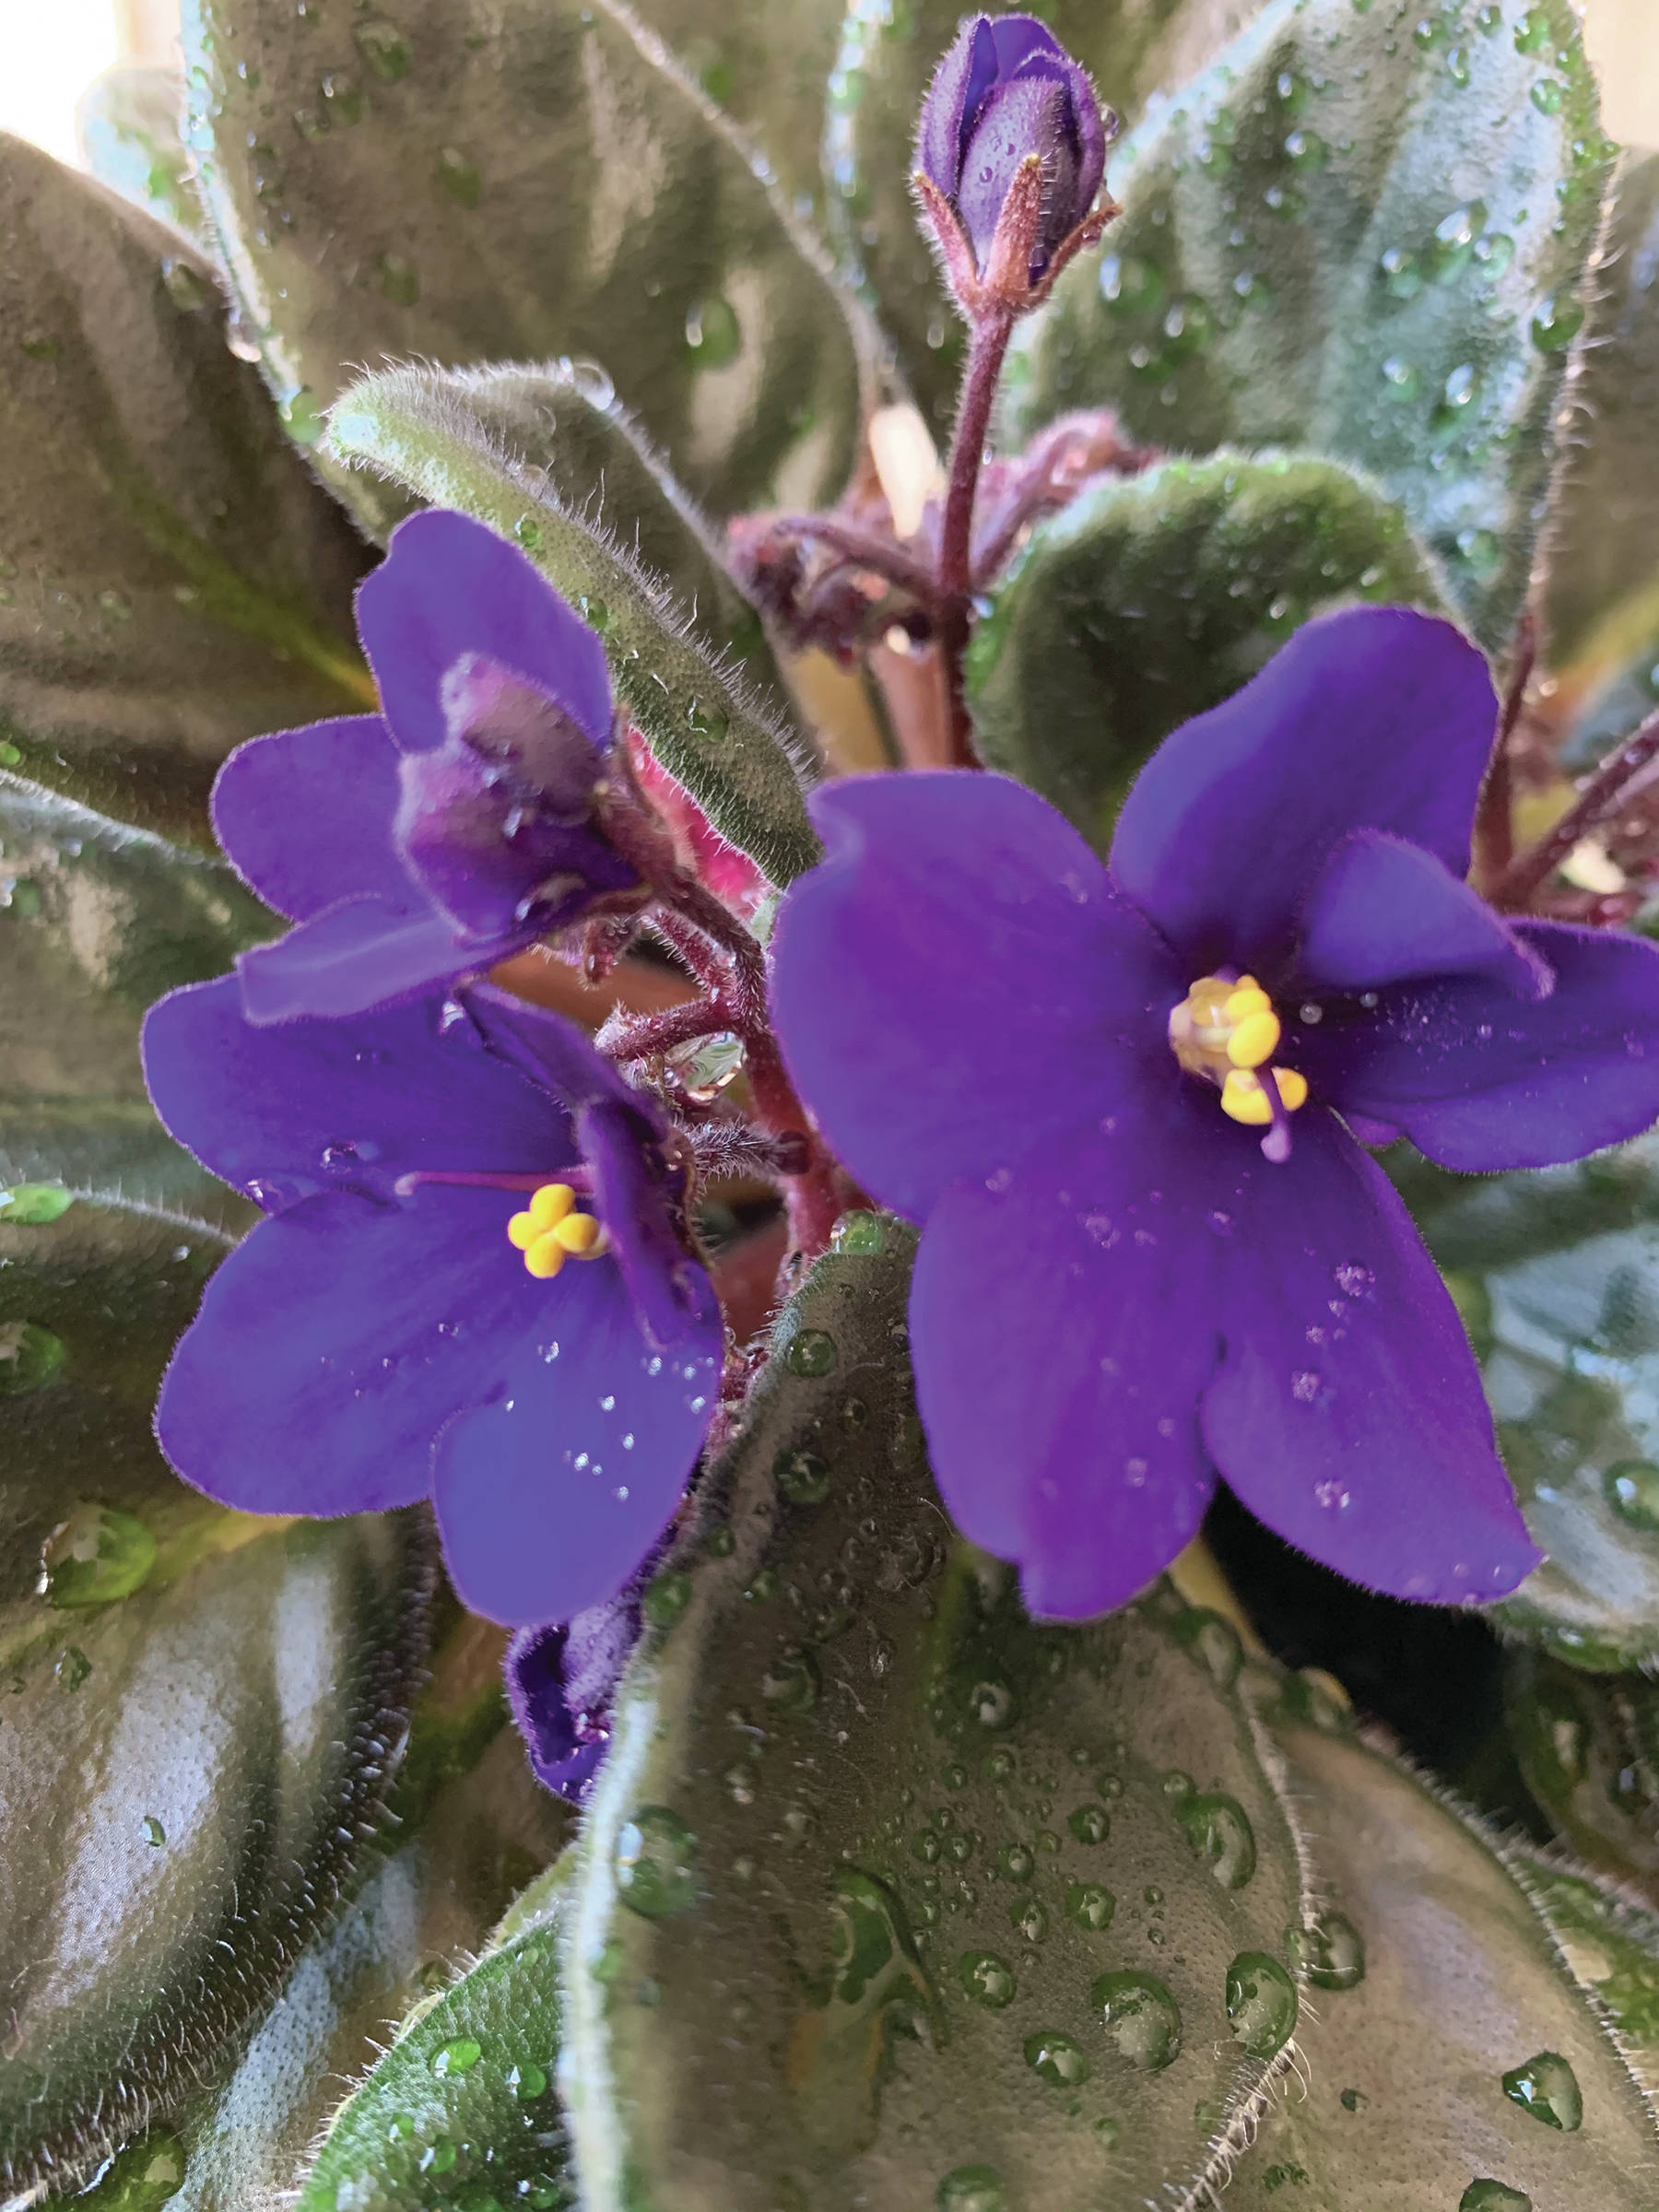 The Kachemak Gardener calls this African violet “the Margaret Pate violet because she gave me the original plant from which several have been propagated and gifted. I think it may be my favorite —if a favorite is possible.” The flower blooms on March 29, 2020, at her Homer, Alaska, home. (Photo by Rosemary Fitzpatrick)